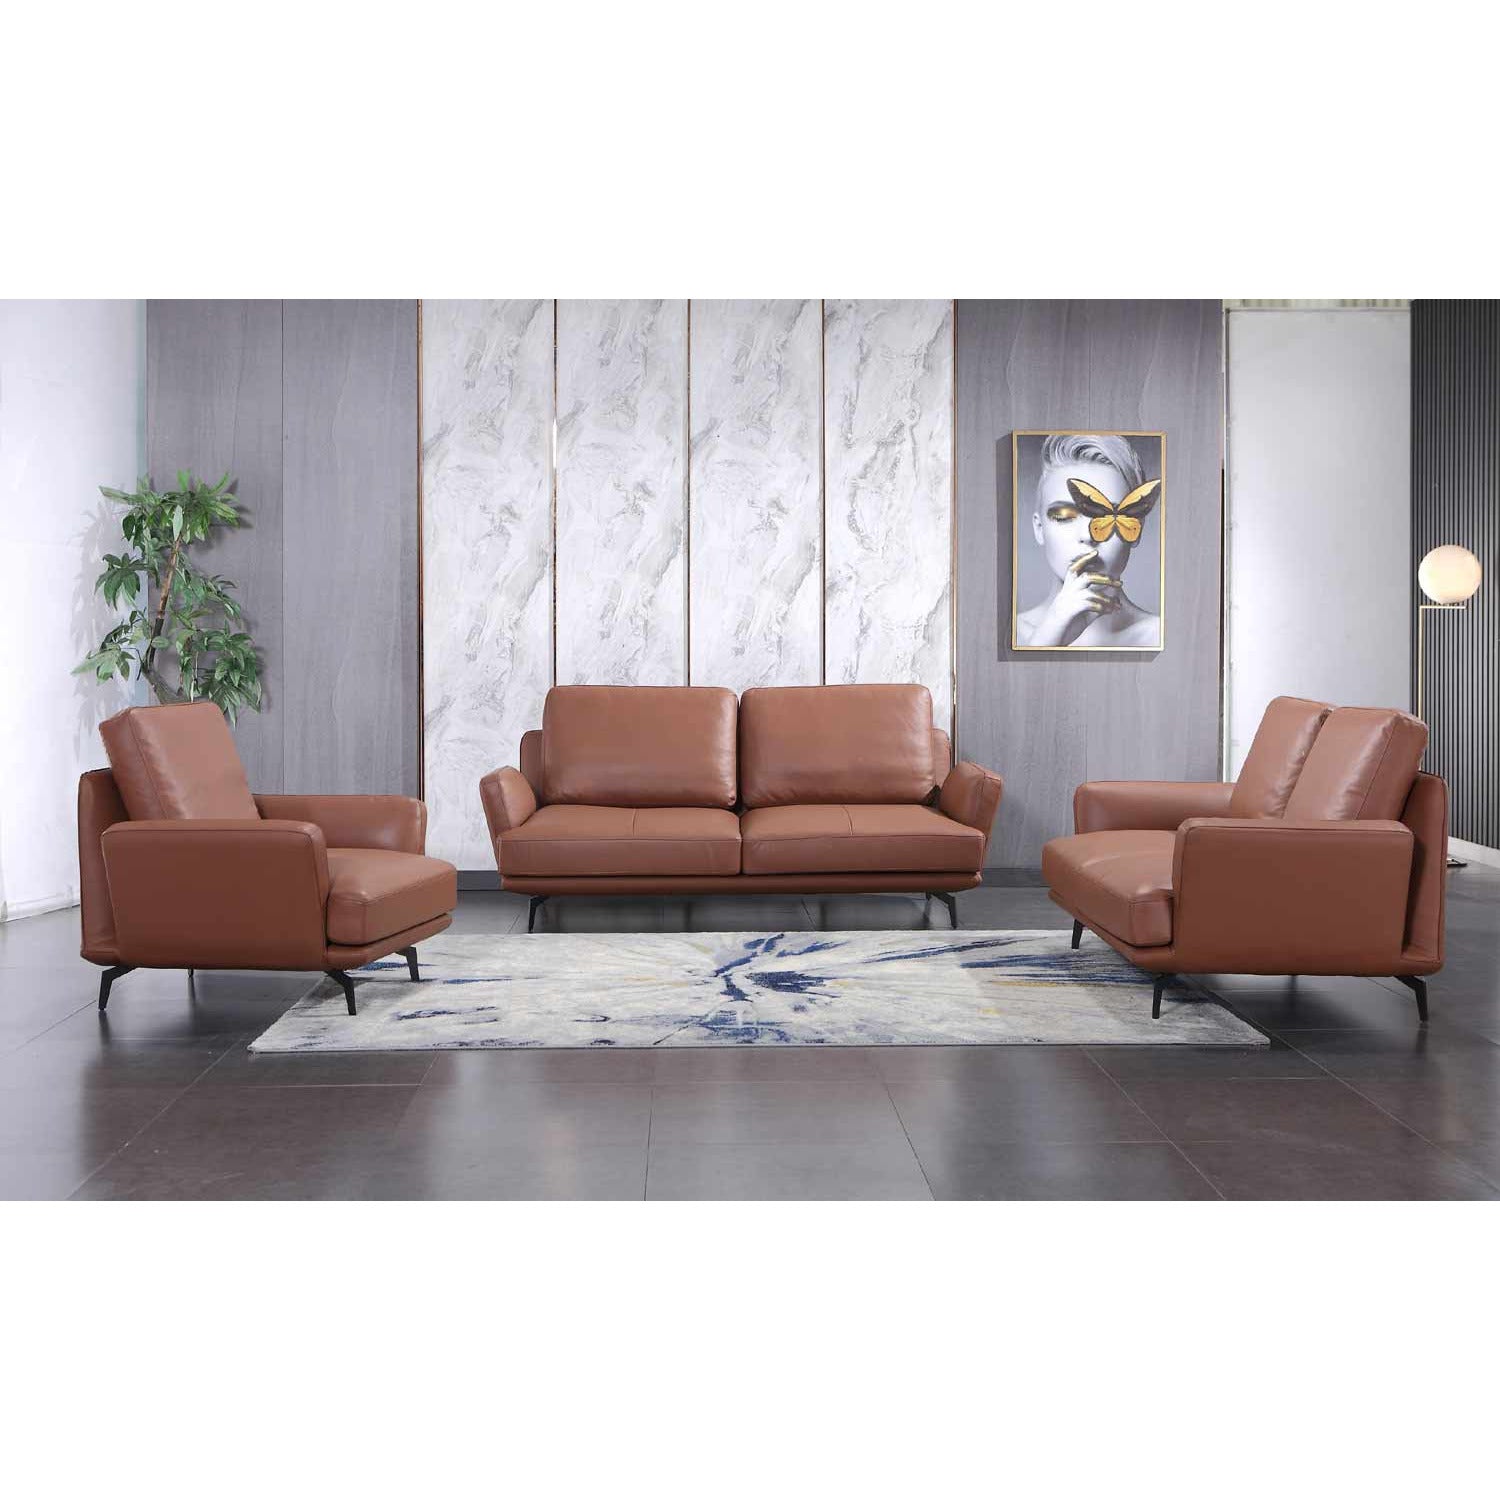 European Furniture - Tratto 3 Piece Living Room Set in Russet Brown - 37455-3SET - New Star Living